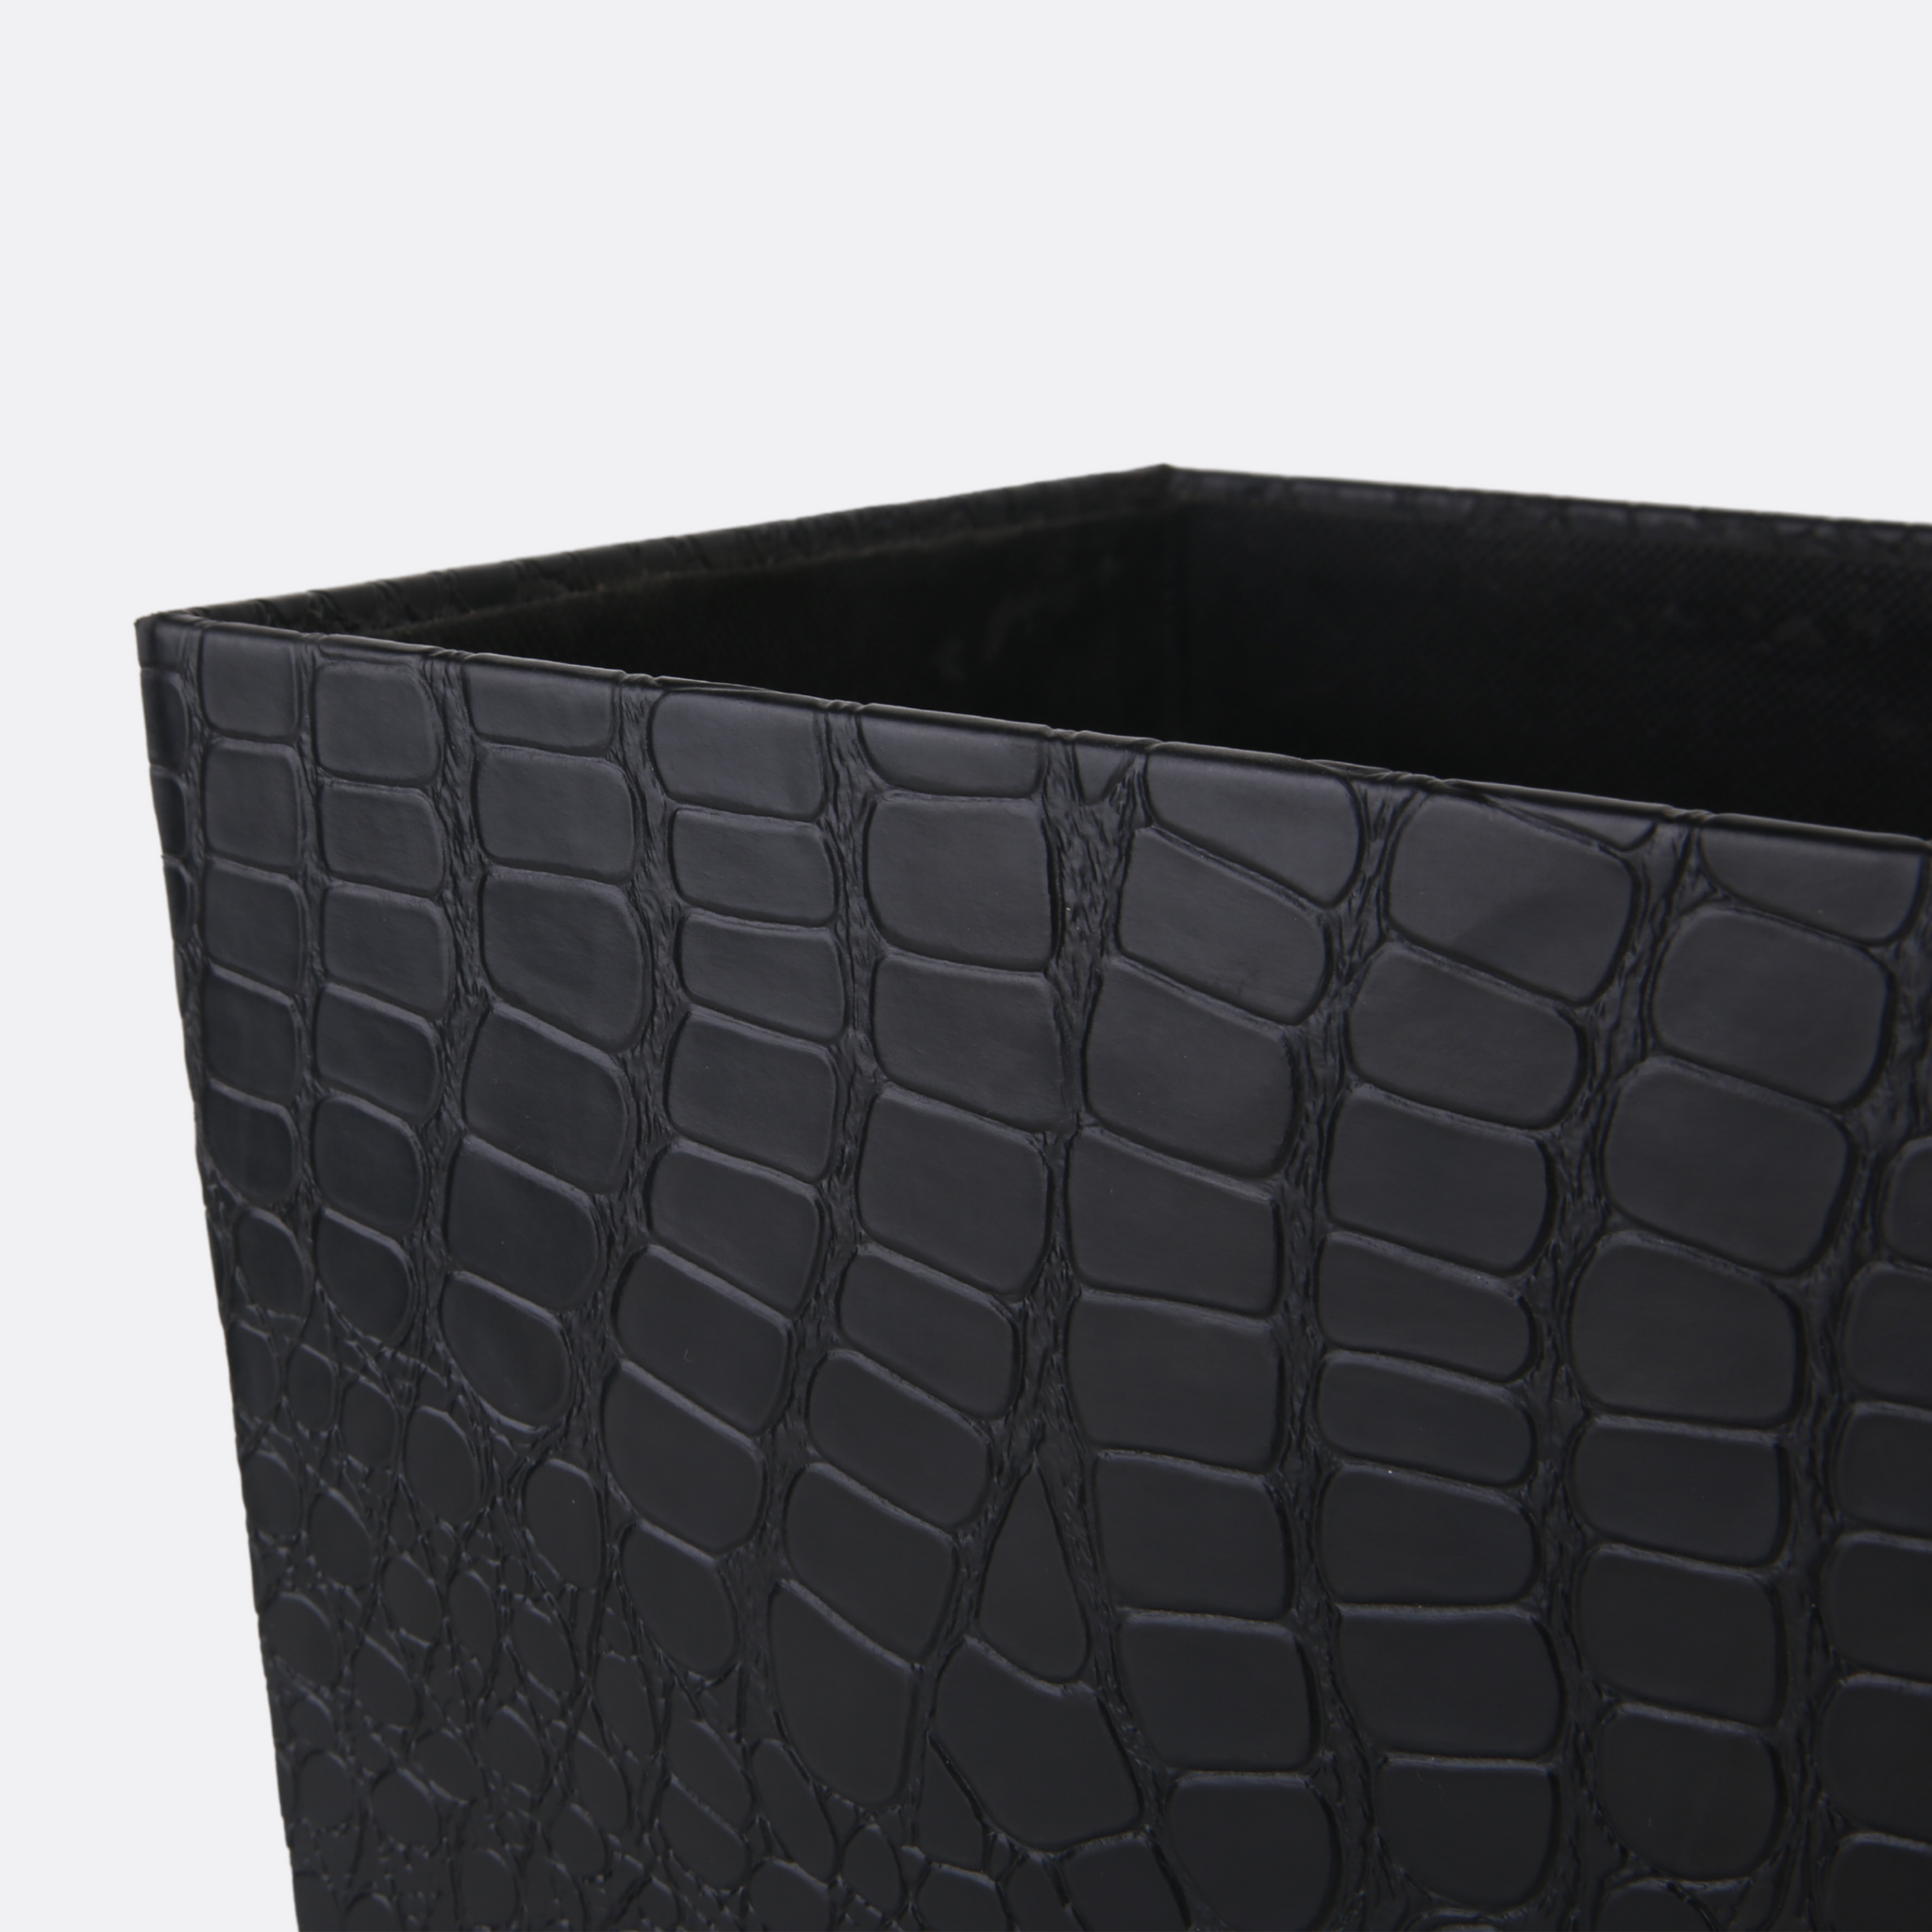 Leather Coated Wooden basket with tissue box